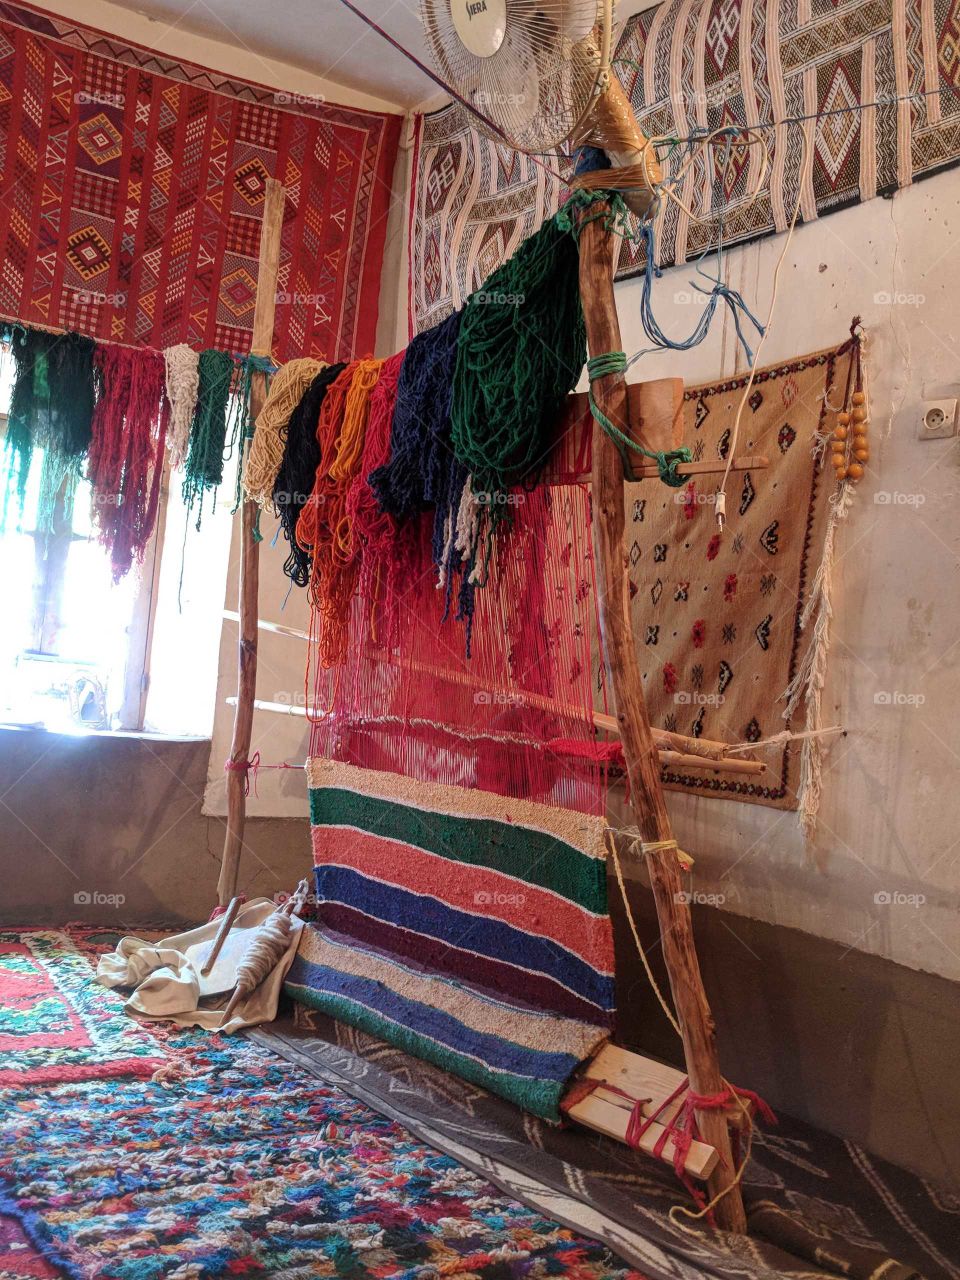 Ornate, Handwoven, Handmade Rug on a Look Surrounded by Wool, Thread, and Rugs in a Tiny Village in Morocco